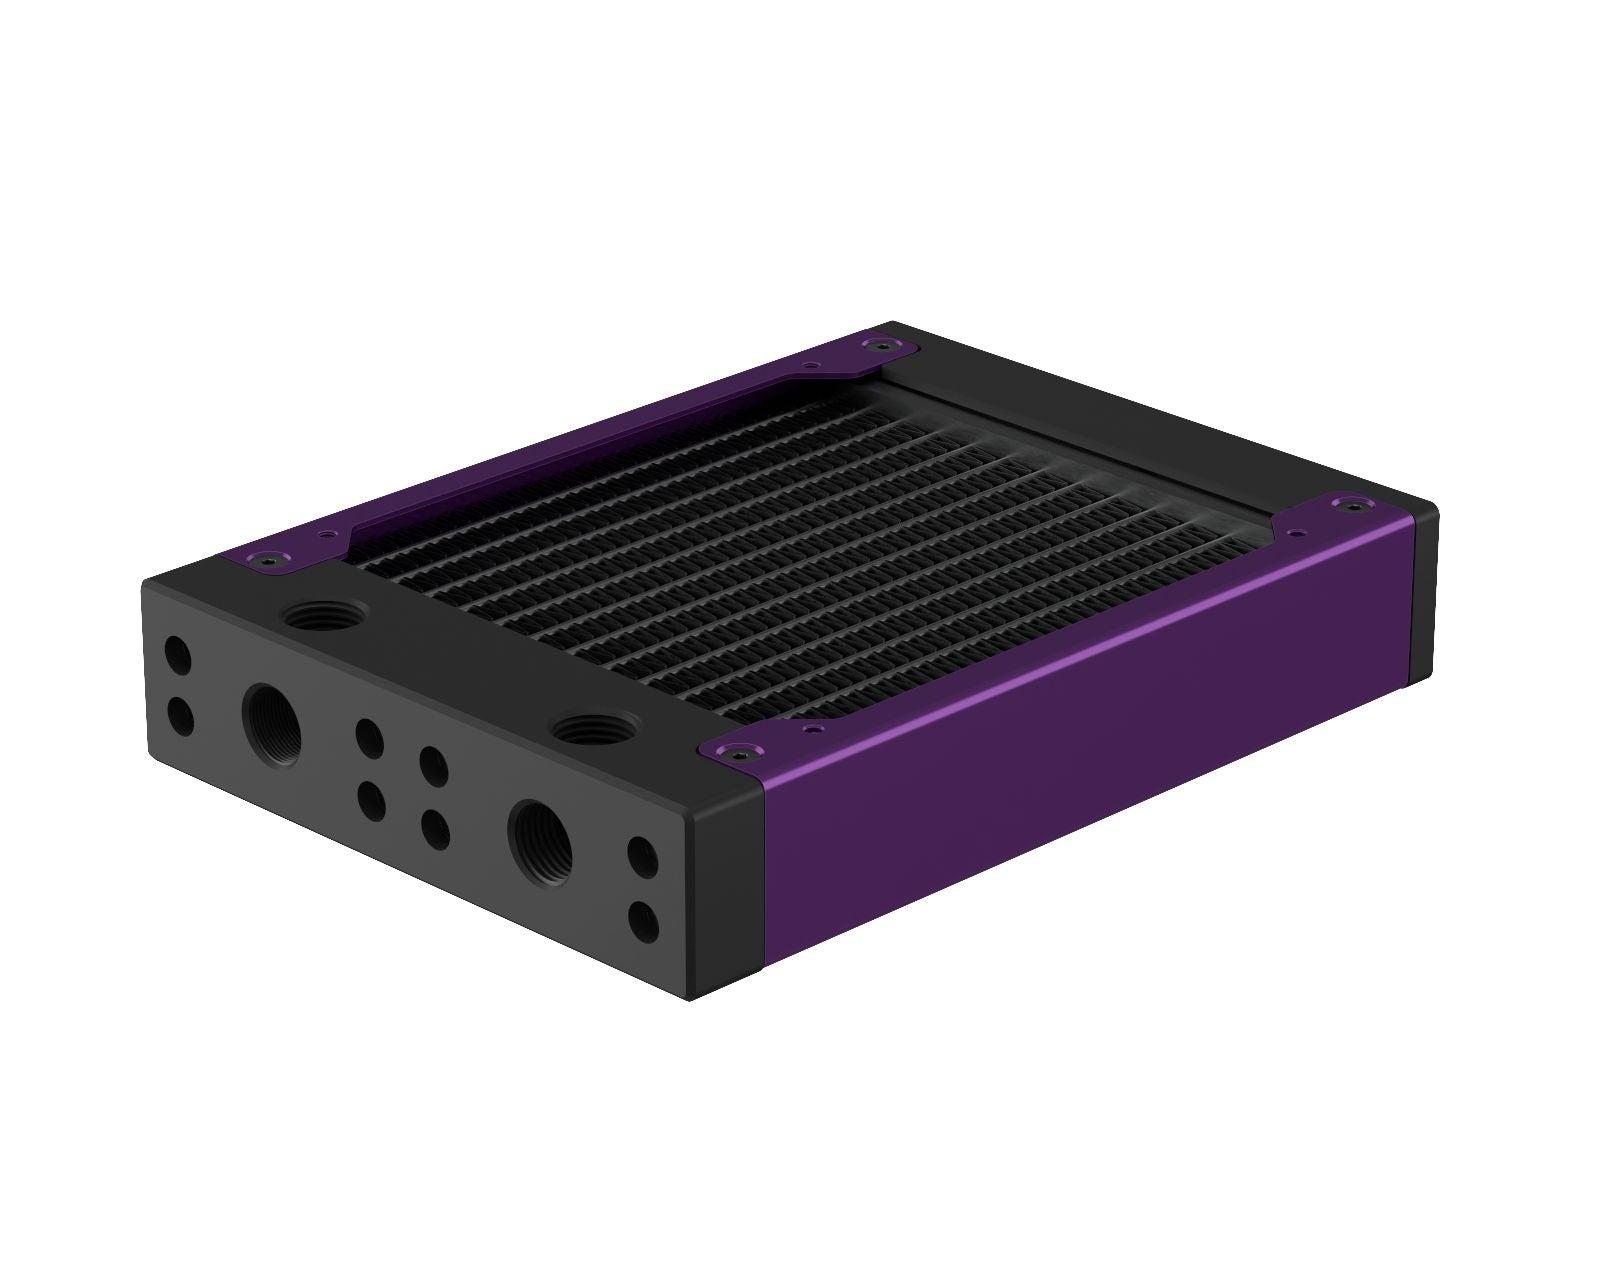 PrimoChill 120SL (30mm) EXIMO Modular Radiator, Black POM, 1x120mm, Single Fan (R-SL-BK12) Available in 20+ Colors, Assembled in USA and Custom Watercooling Loop Ready - Candy Purple